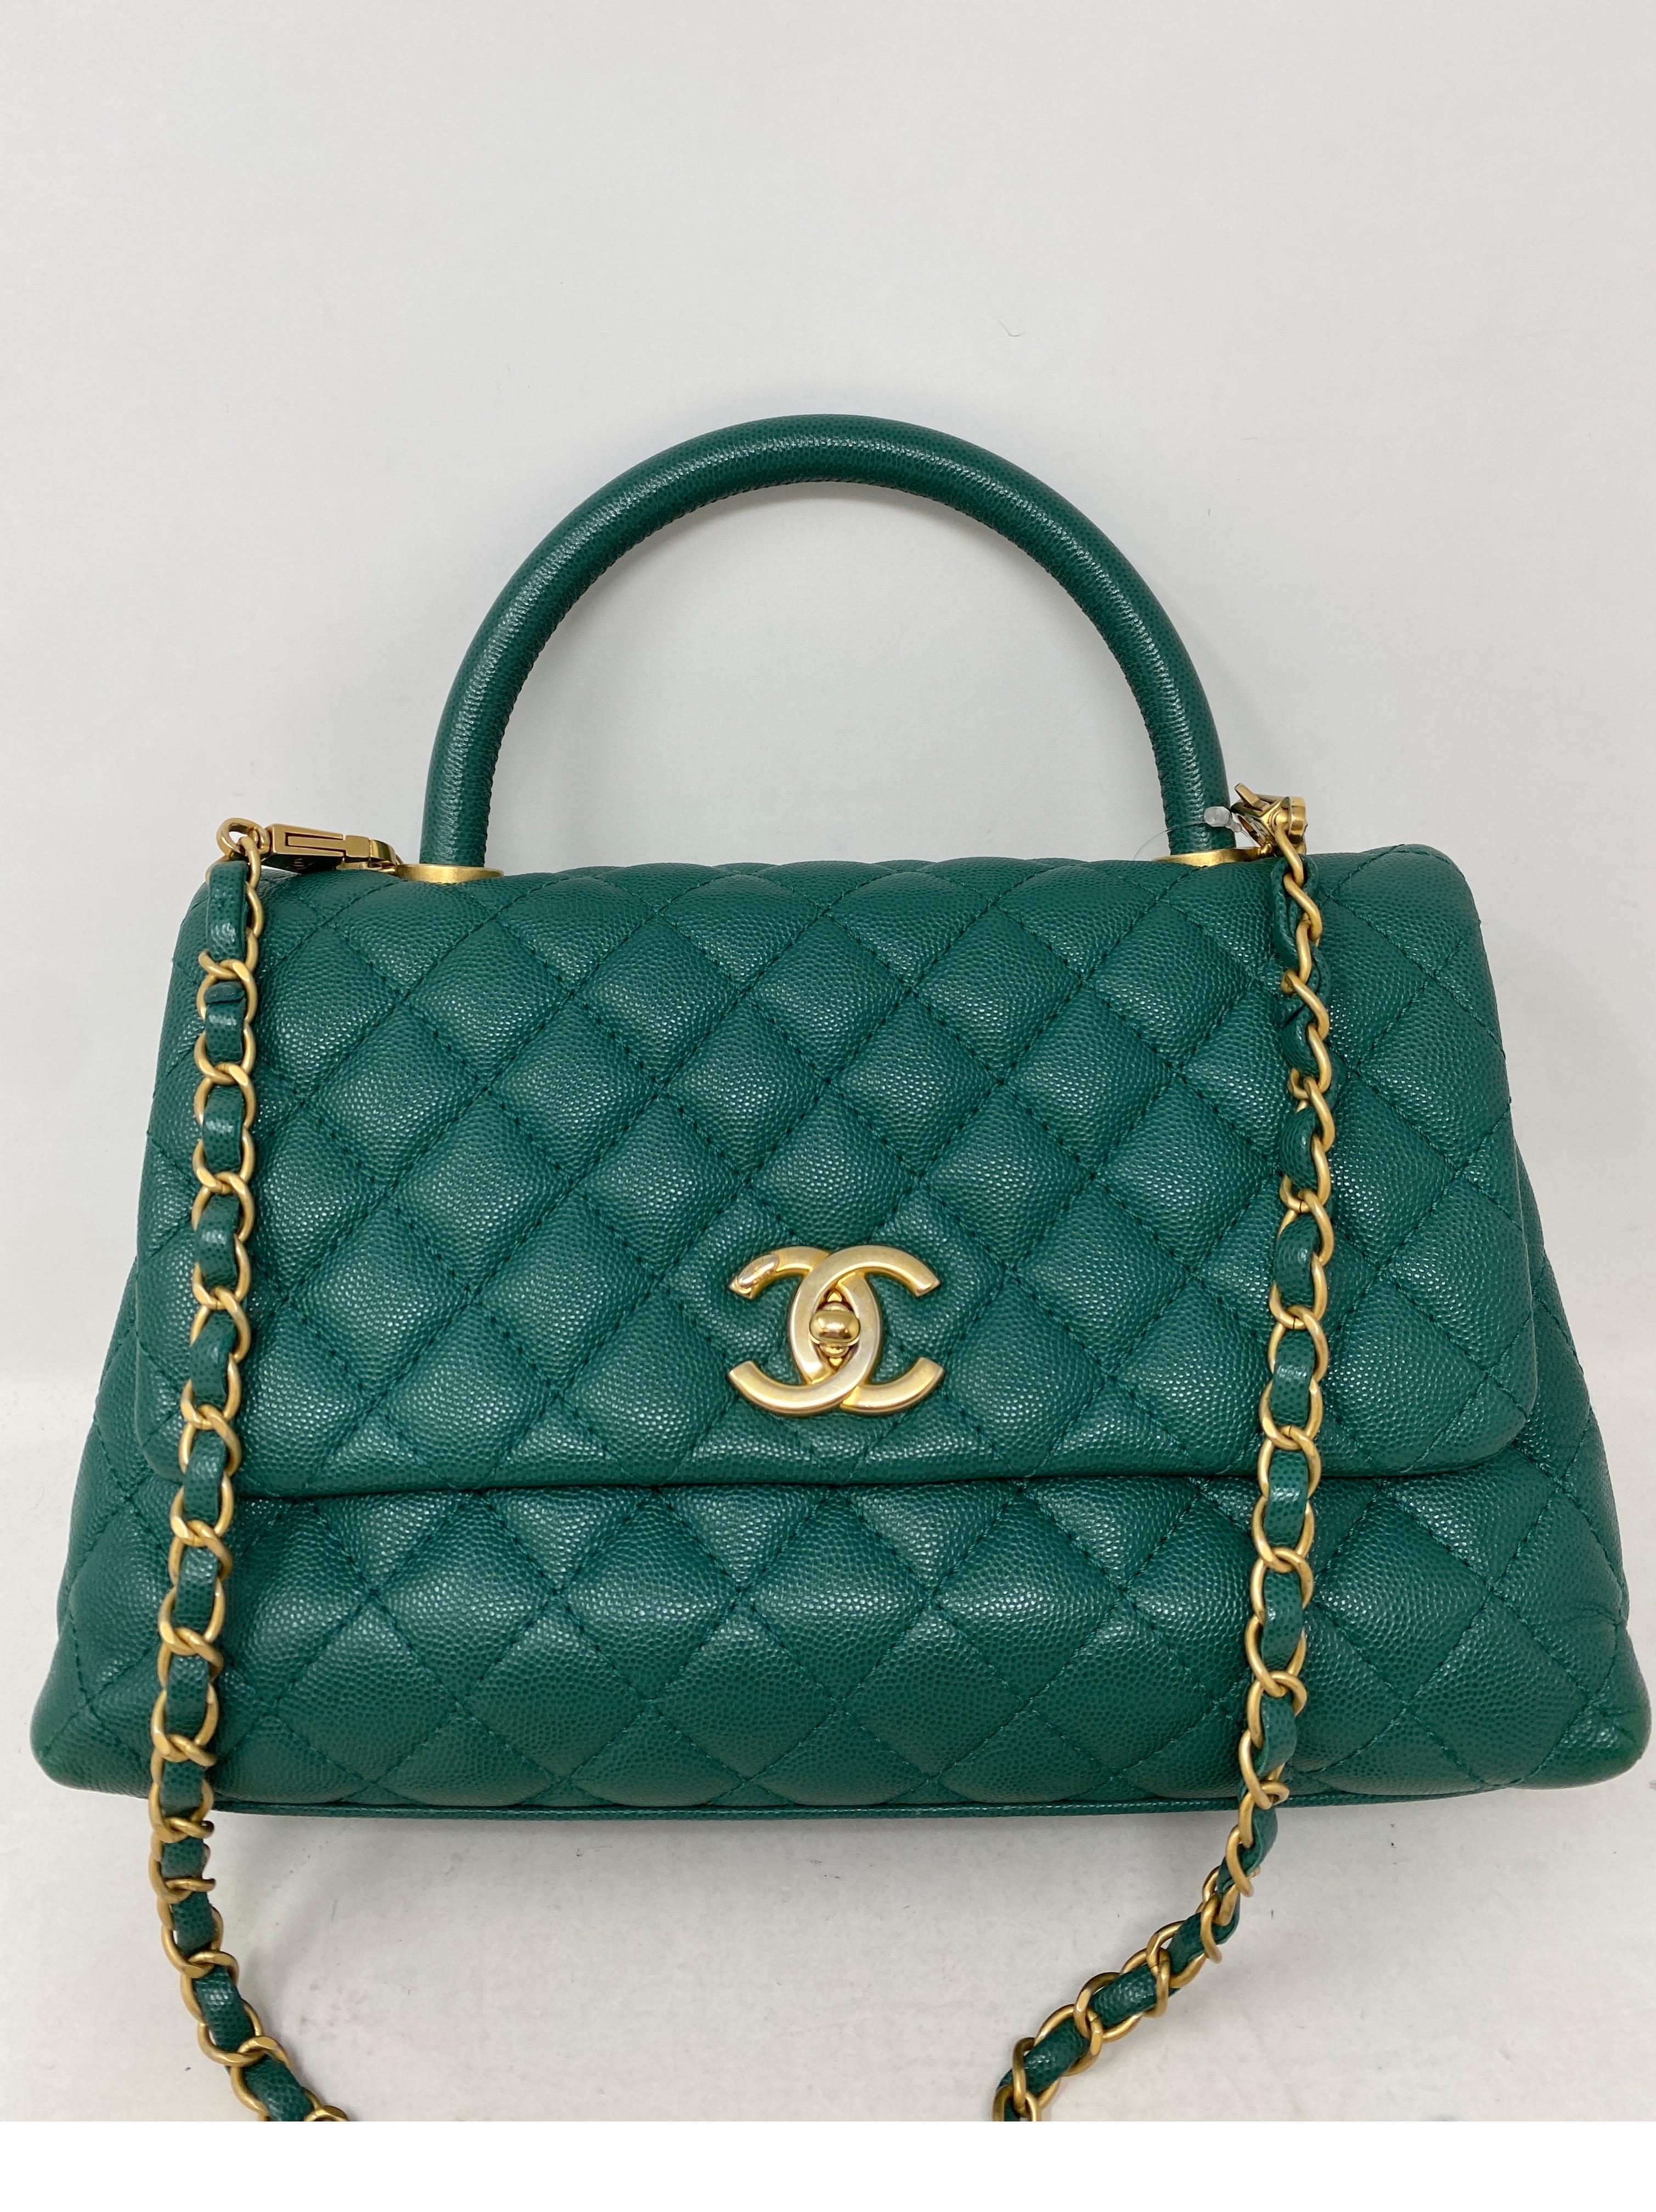 Chanel Green Coco Handle Medium Bag. Excellent condition. Light wear inside bag. Exterior looks great. Rare green color Chanel bag. Gold hardware. Collector's piece. Guaranteed authentic. 